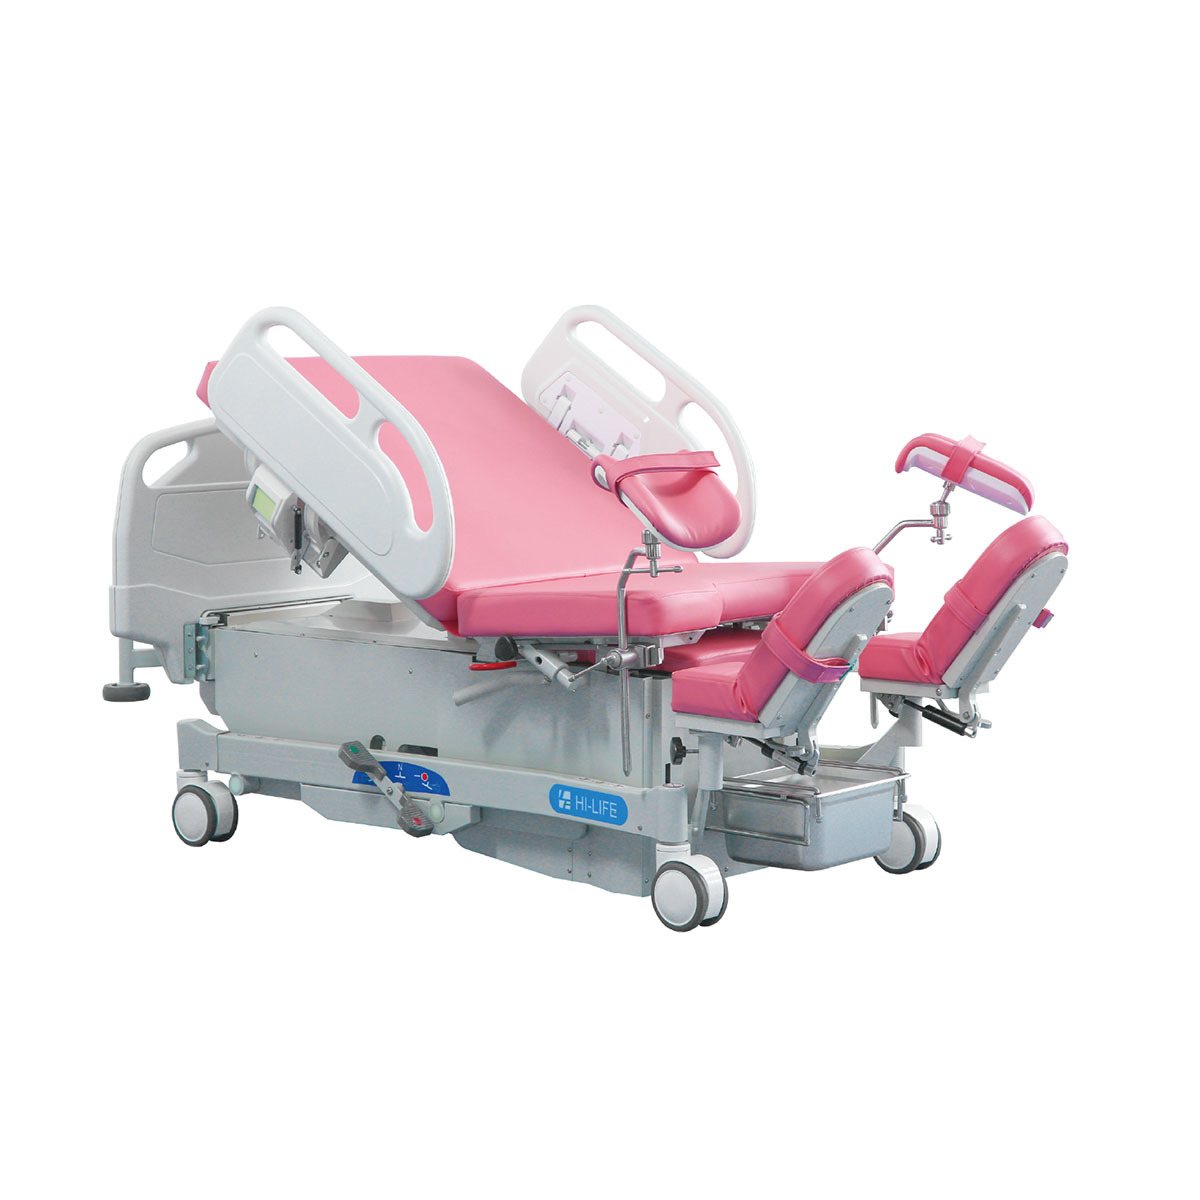 HL-B221A LDR Obstetric Bed